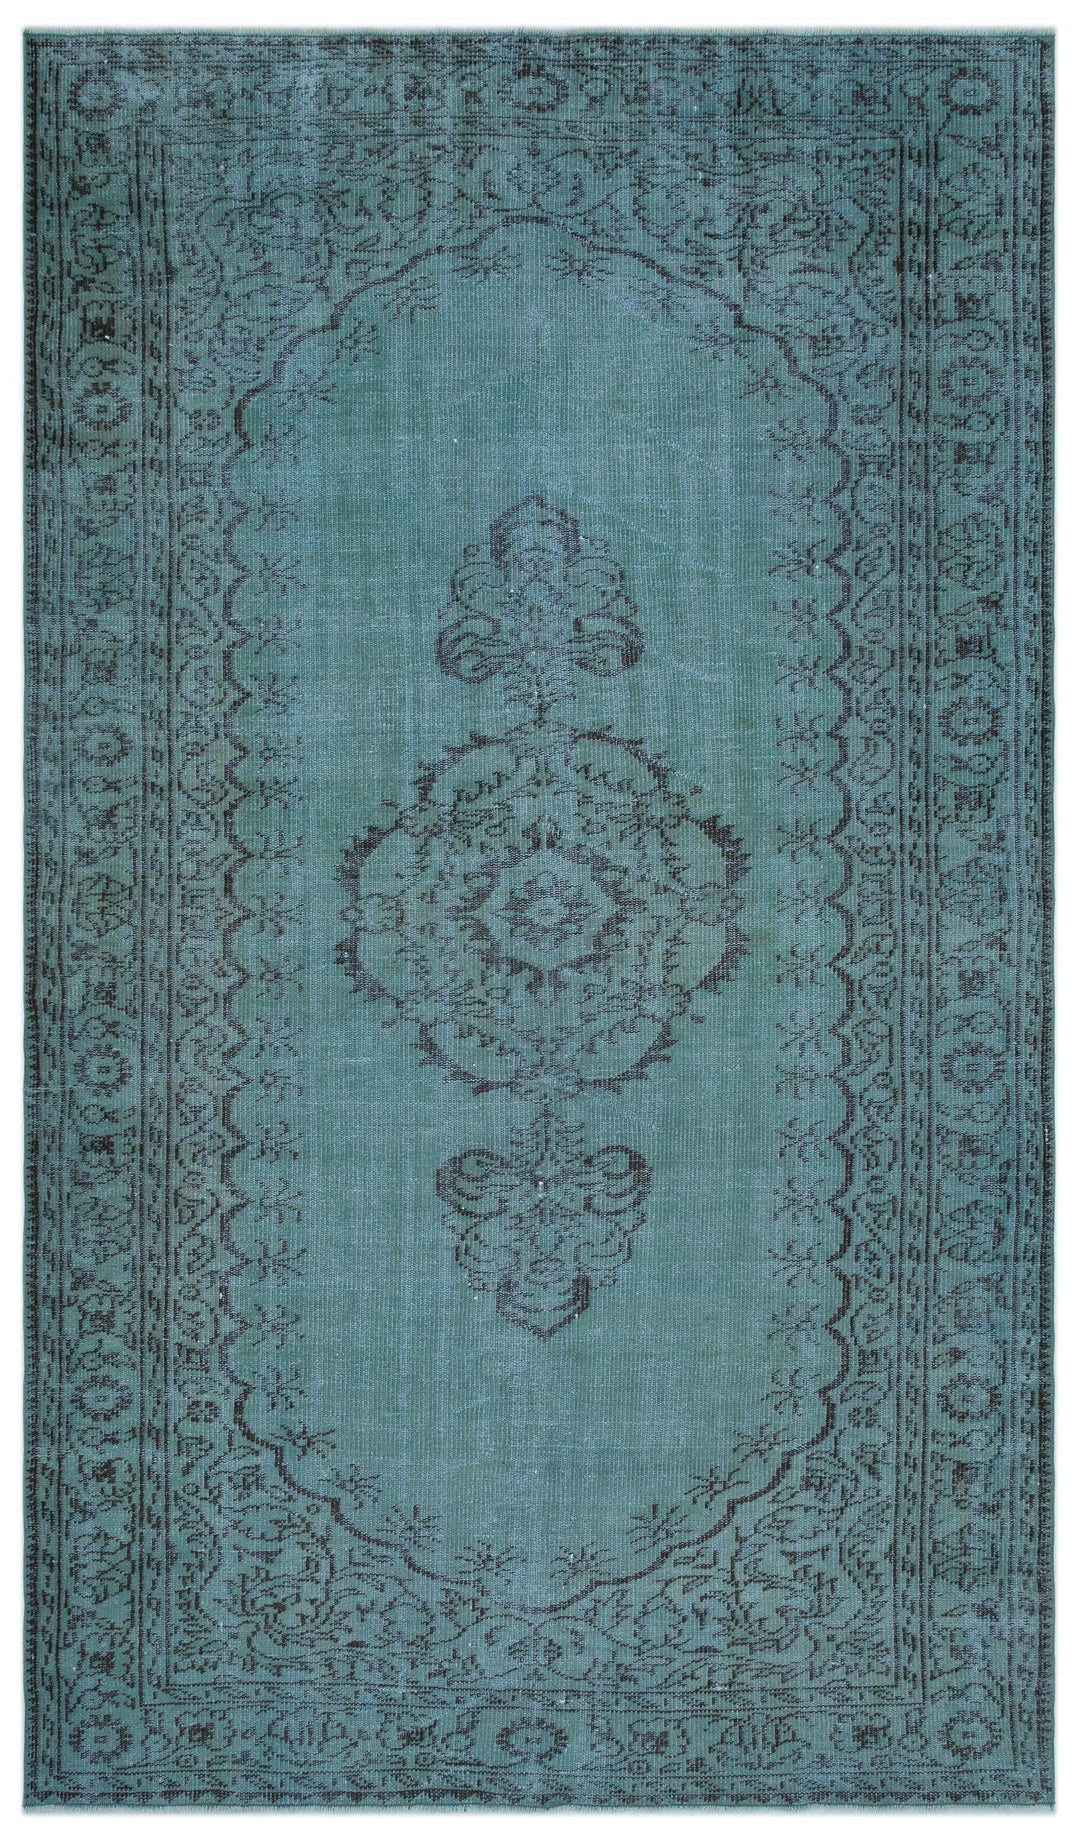 Athens Turquoise Tumbled Wool Hand Woven Rug 176 x 300